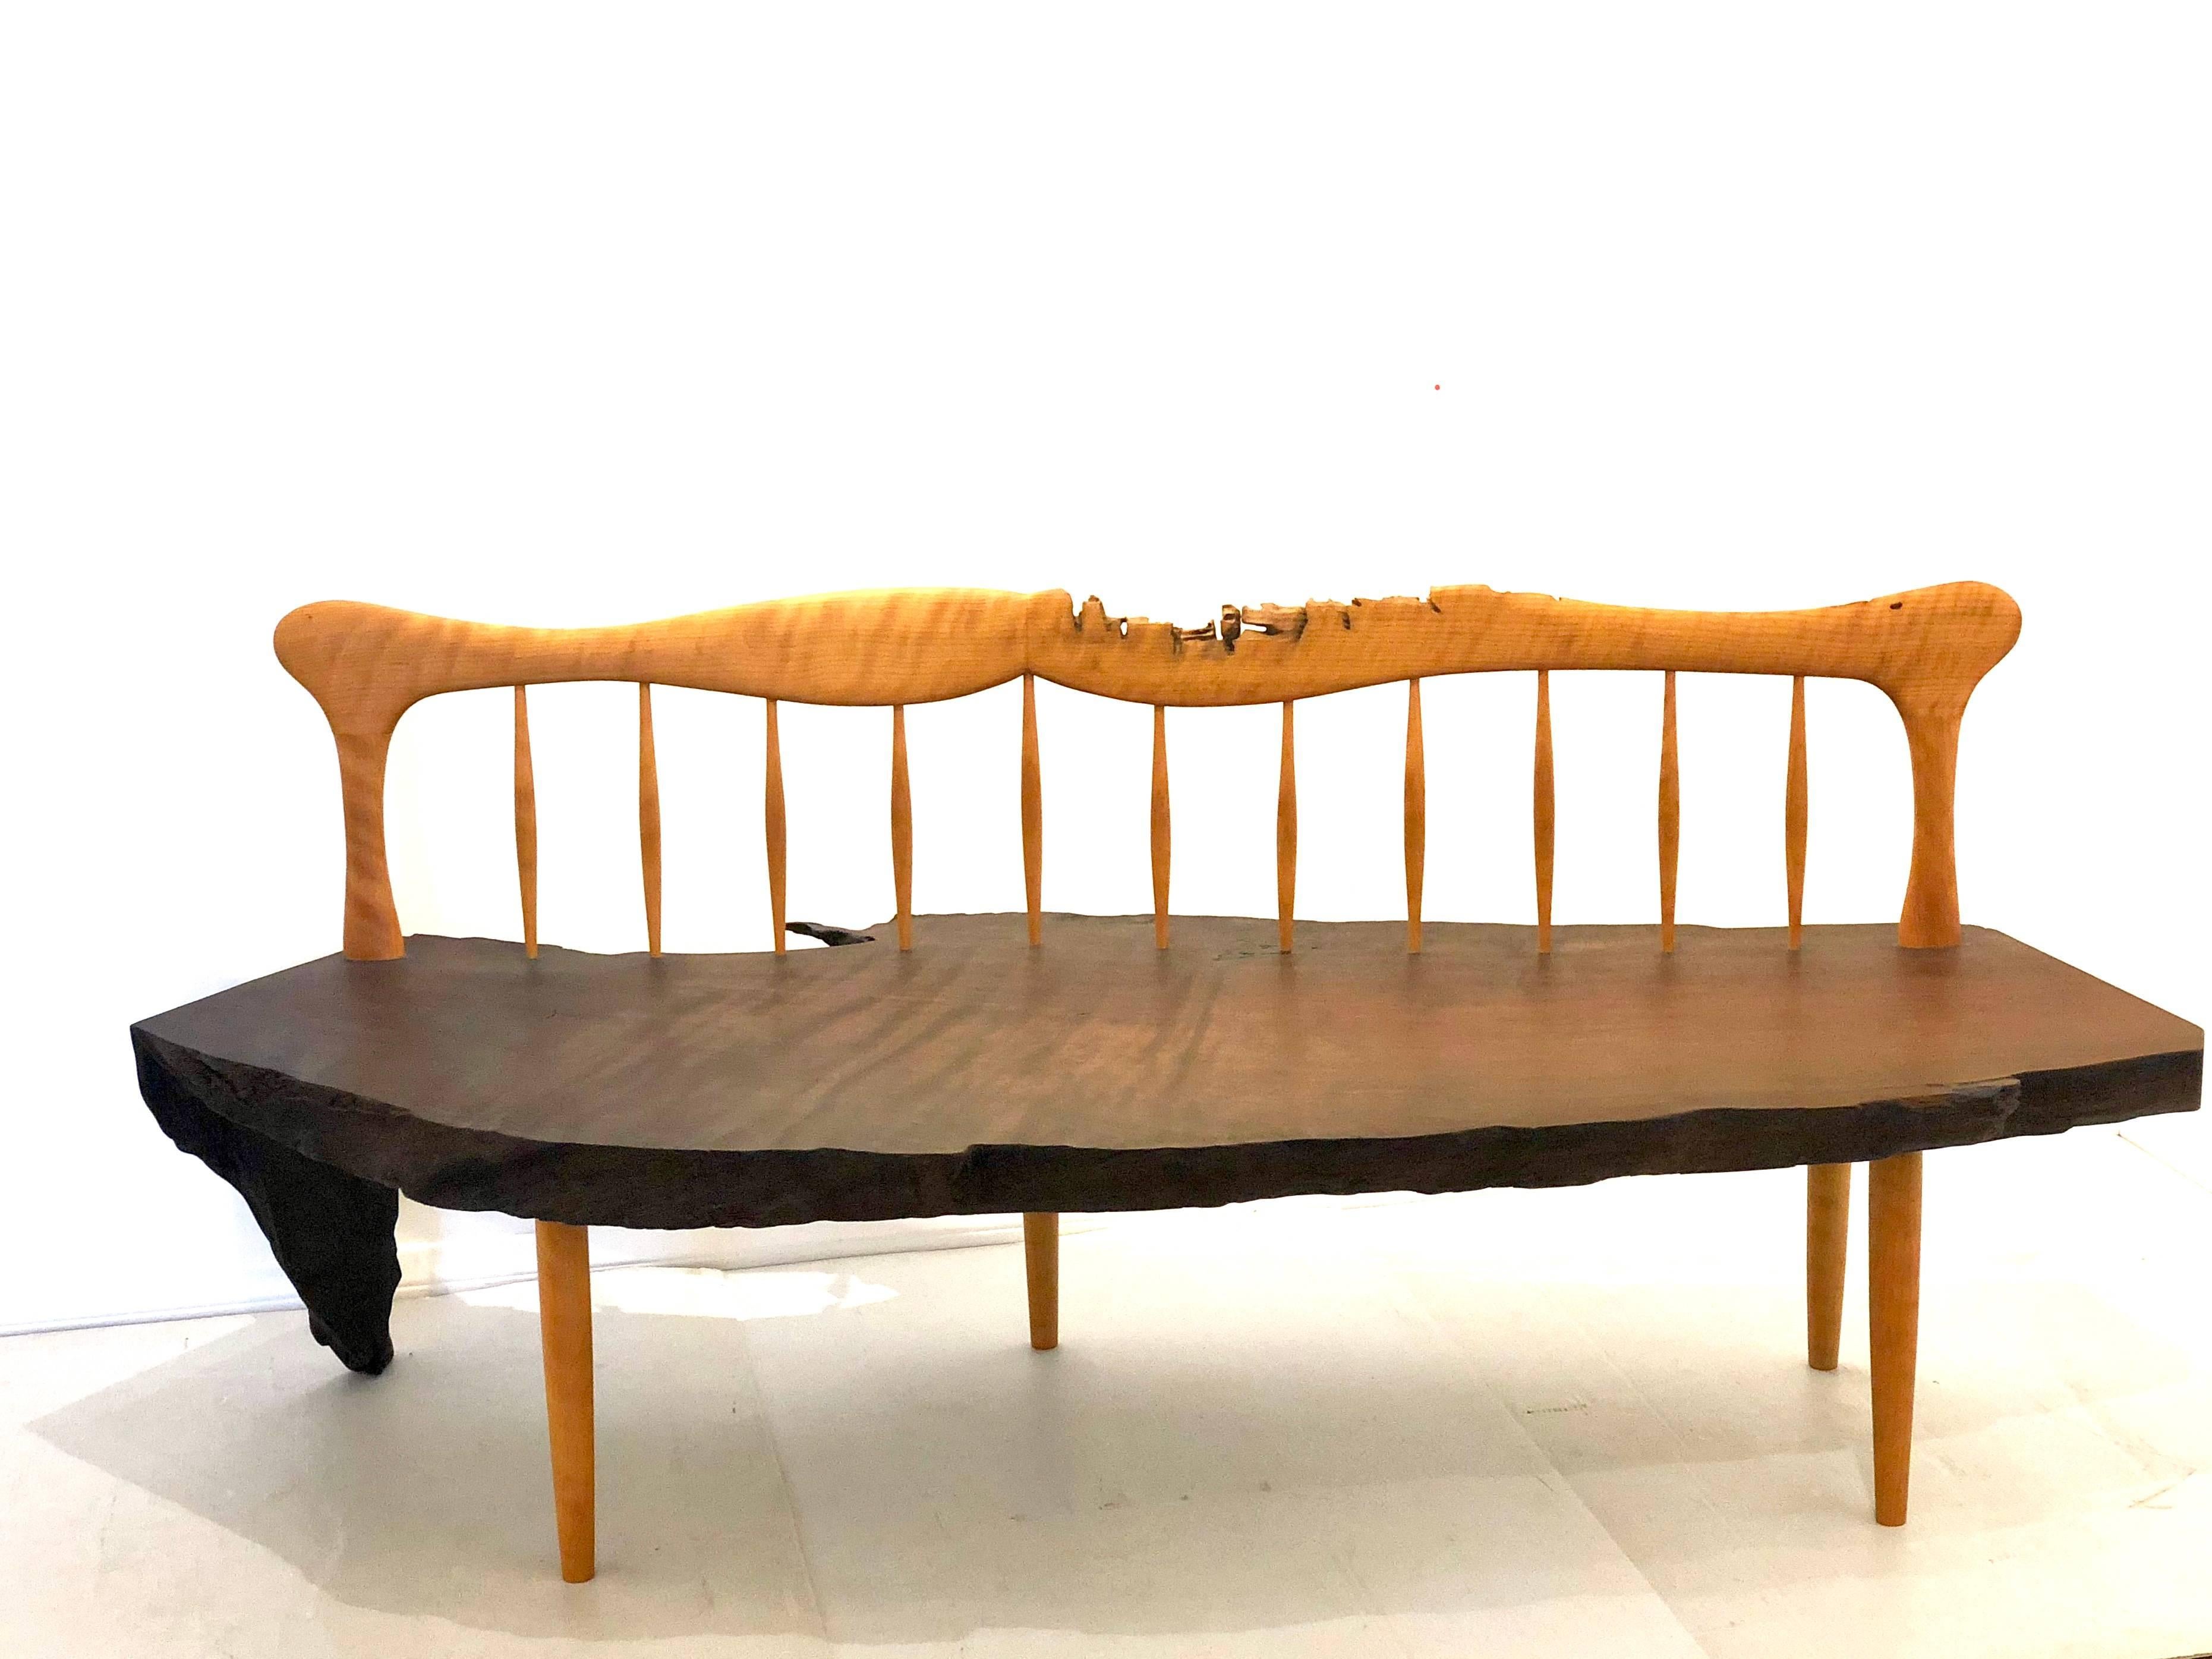 Beautiful well done large bench by San Diego Craftsman Joe Bedford, circa 2000, red wood and maple combination, solid and sturdy live edge, nice hand rubbed oil finish.